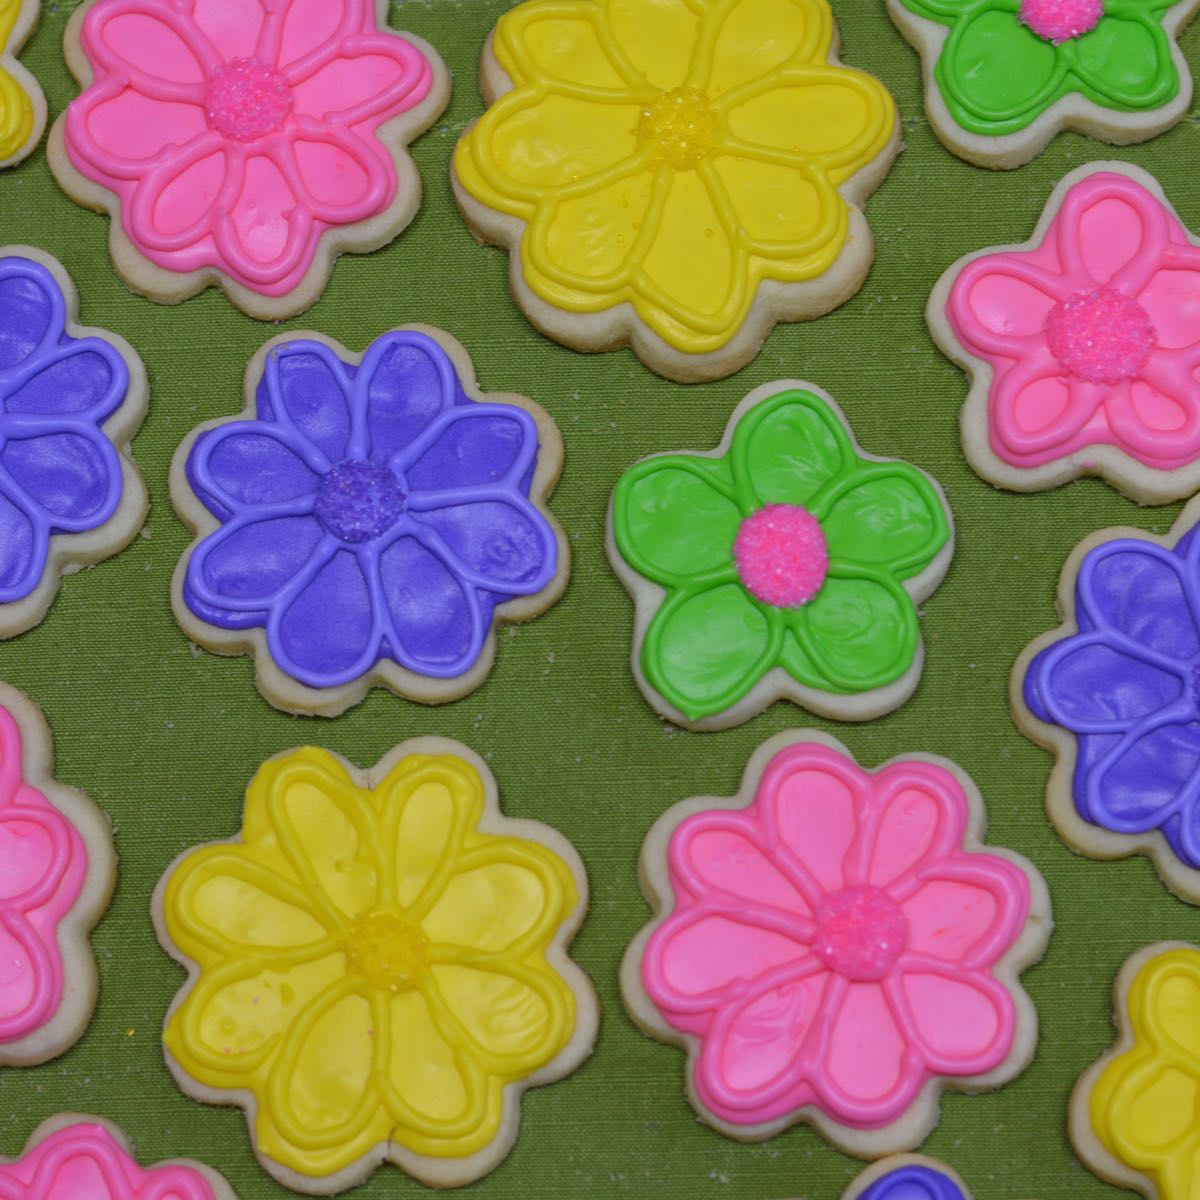 Gluten free sugar cookies shaped like flowers decorated with brightly coloured royal icing.